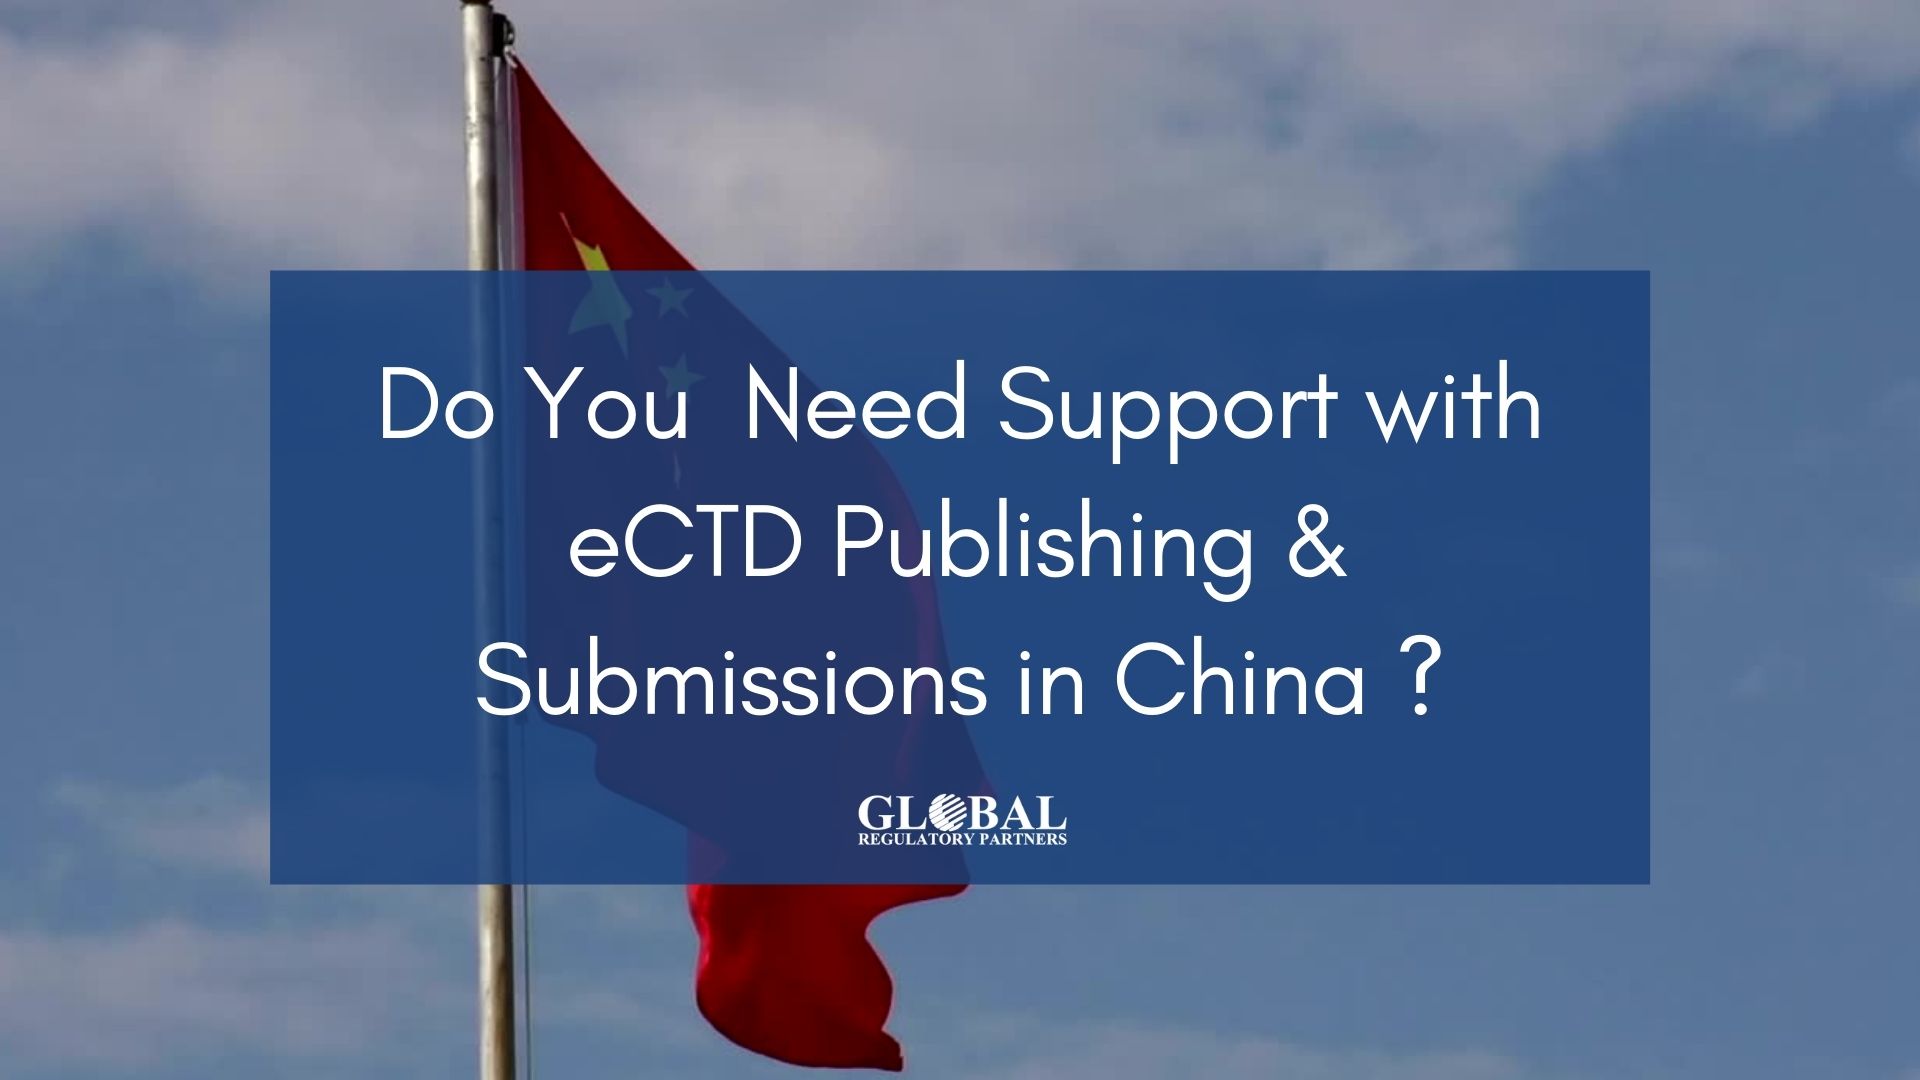 eCTD Publishing & Submission Support in China